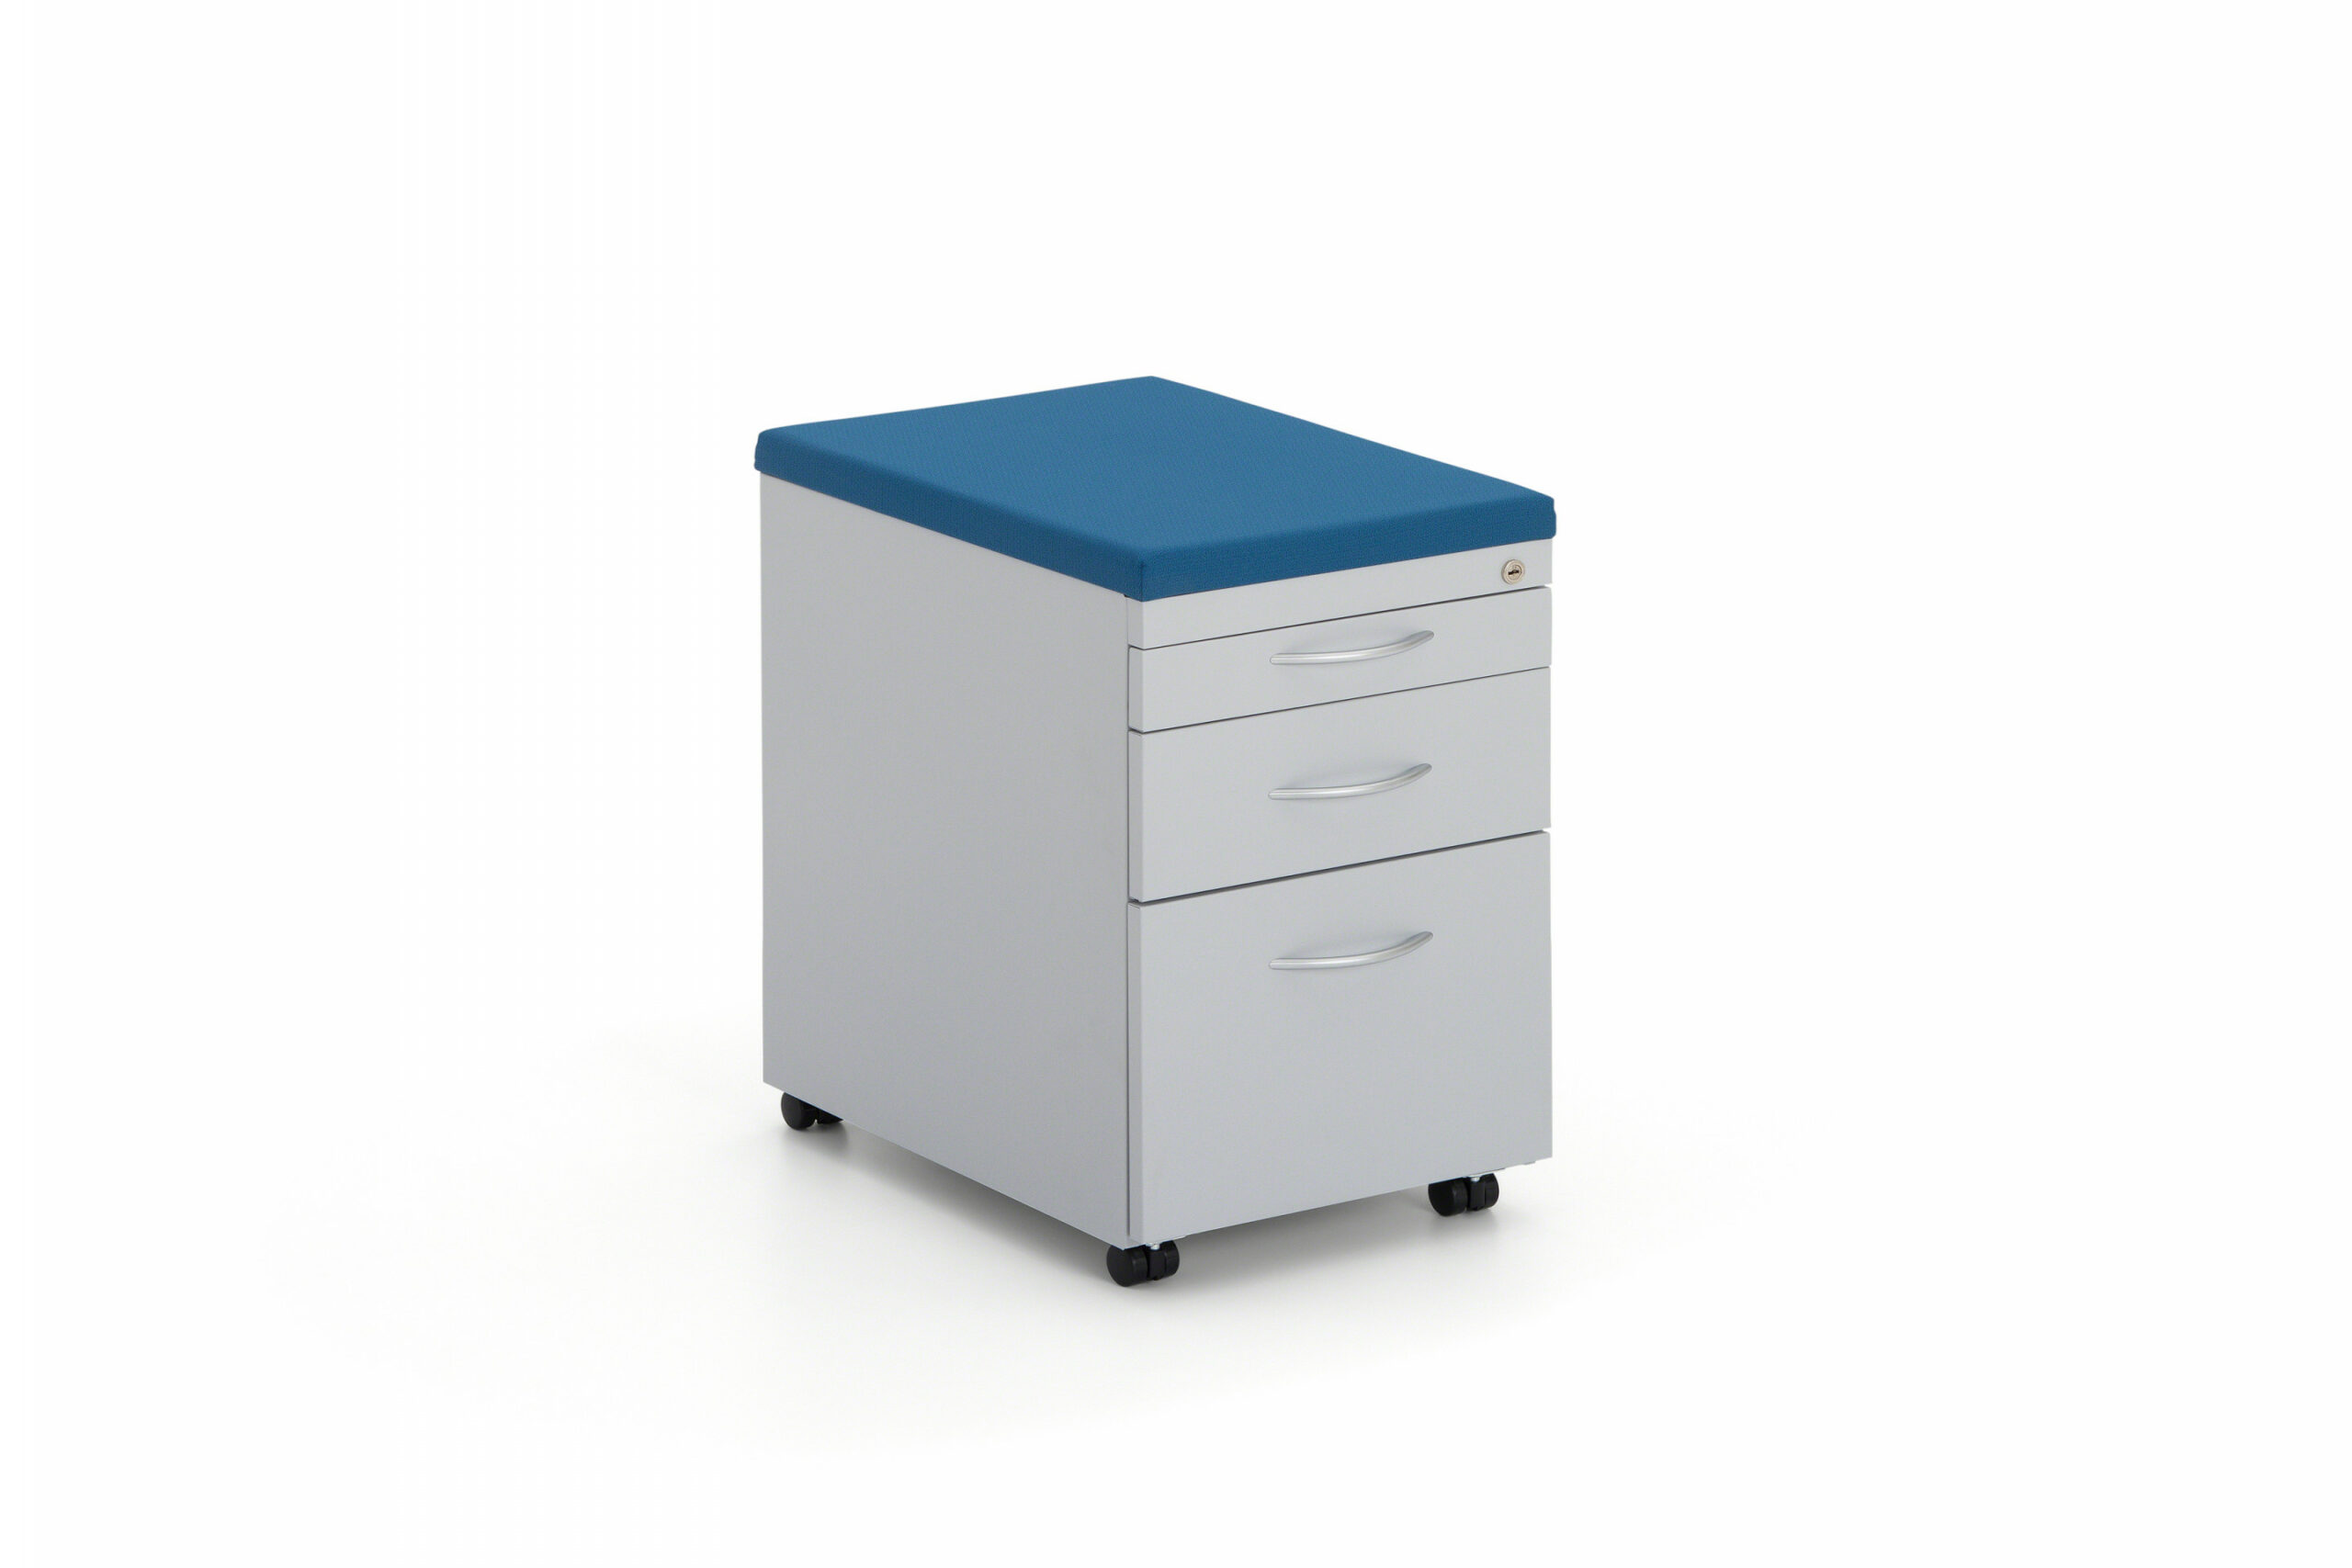 TS Series Drop File Storage Cabinets & Mobile Pedestals  Steelcase